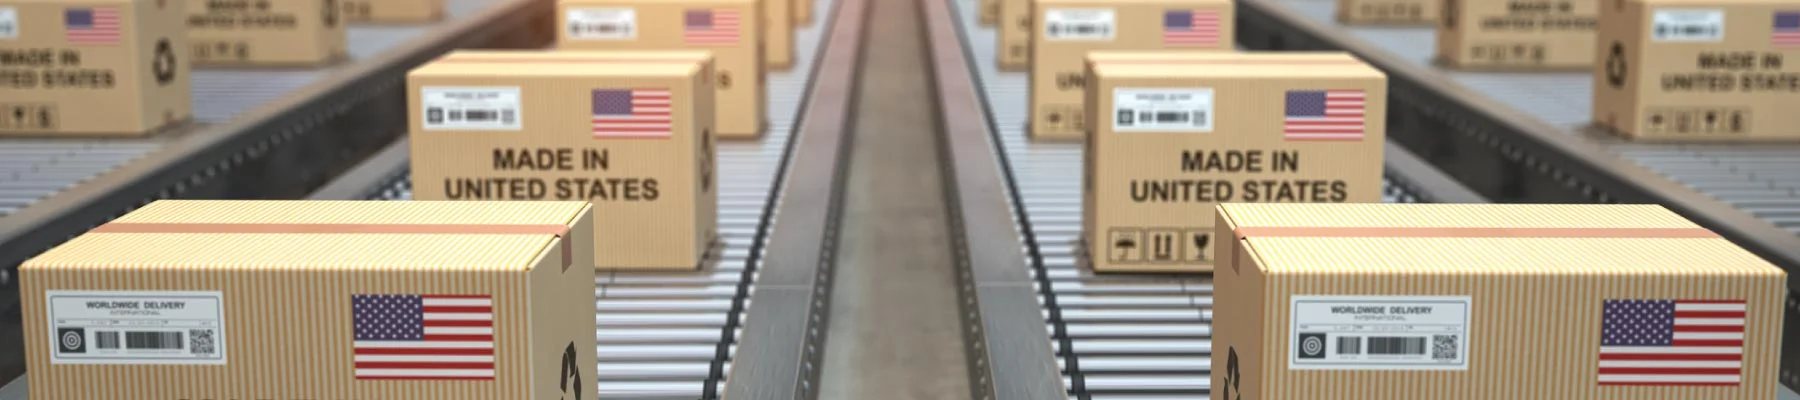 made in USA packages on a conveyor belt